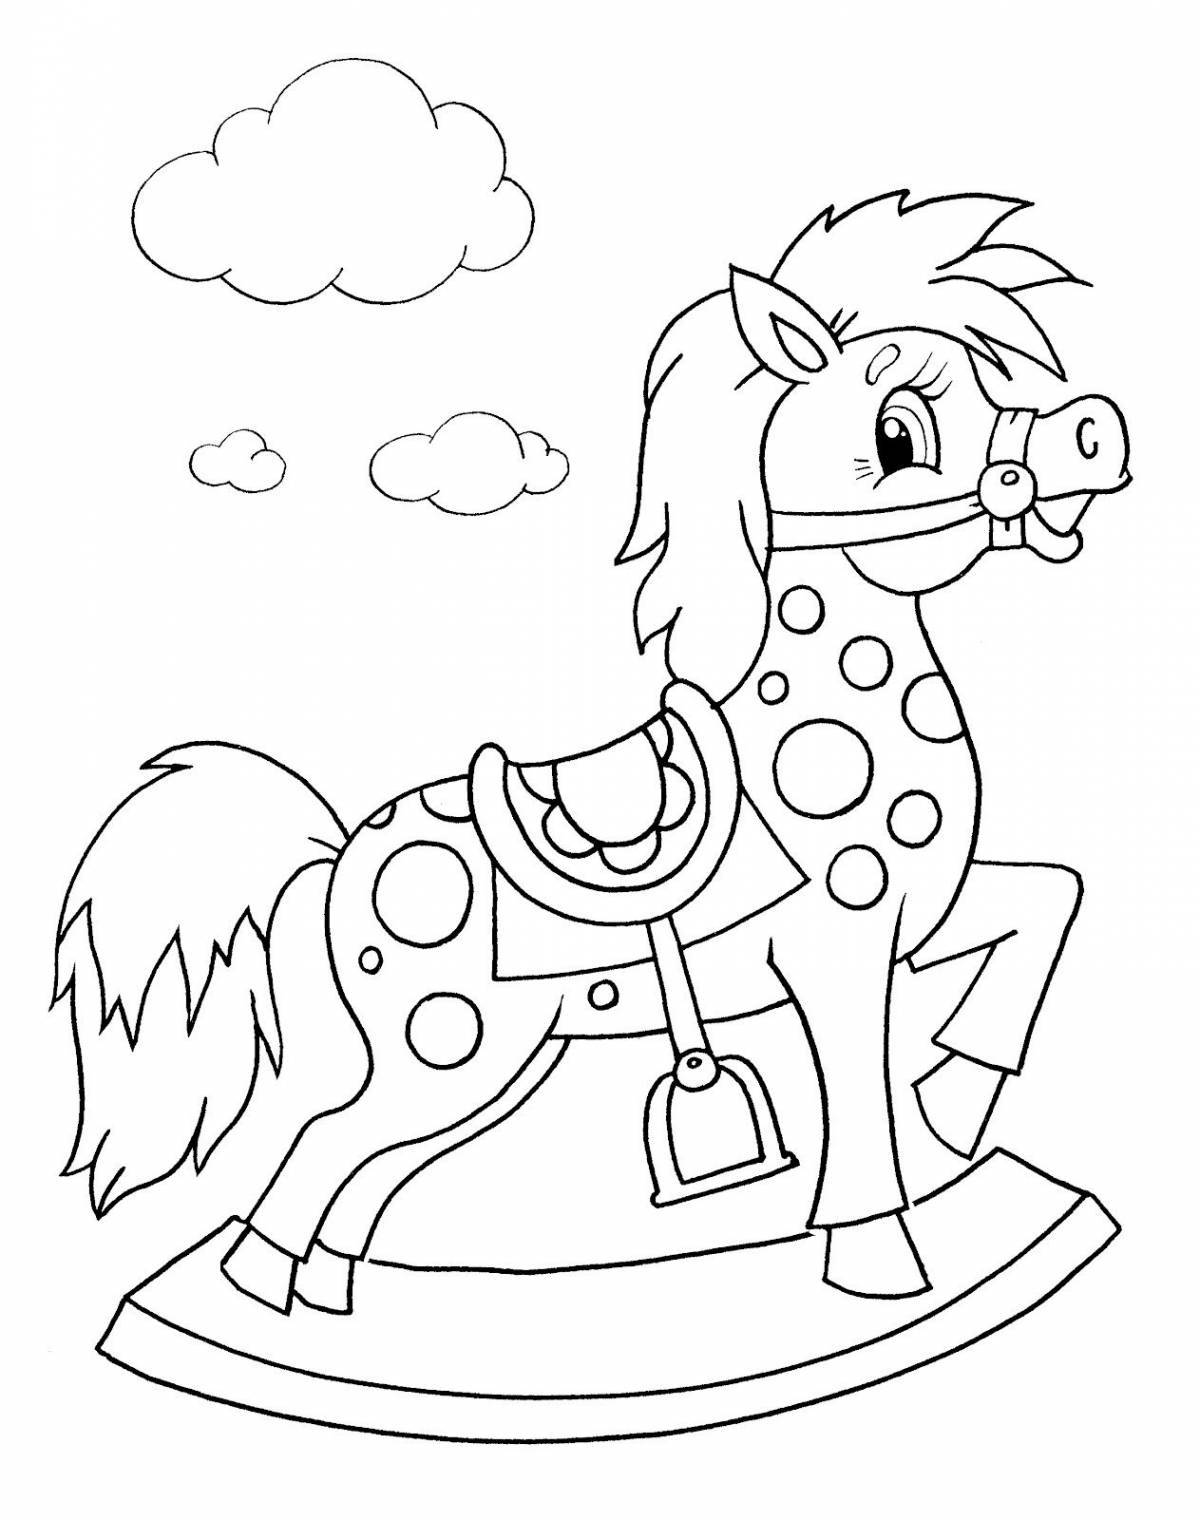 Playful pony horse coloring for kids